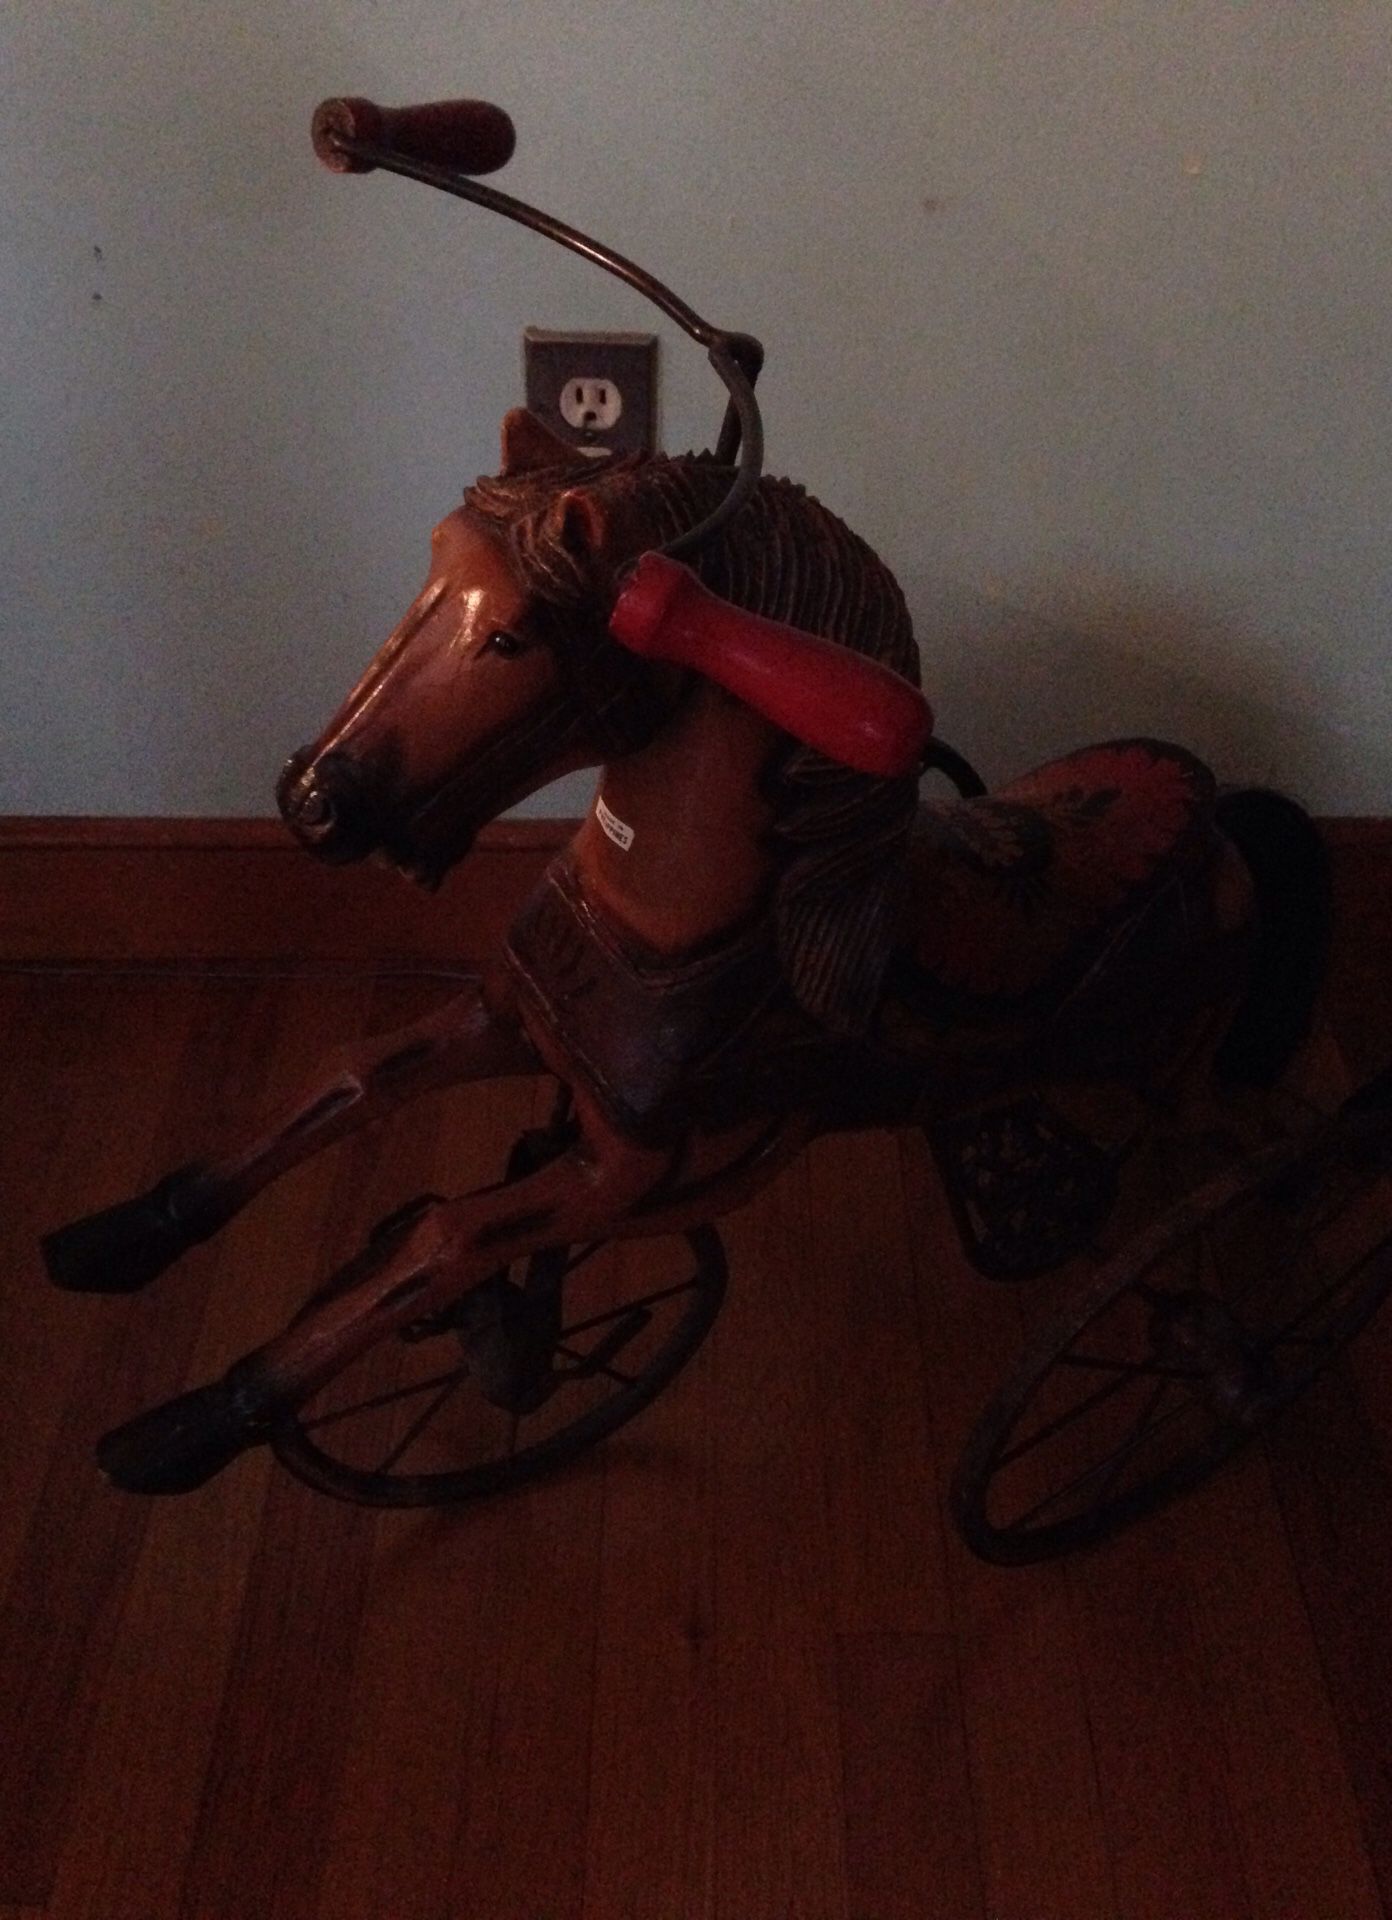 Antique tricycle horse looks nice in any living room